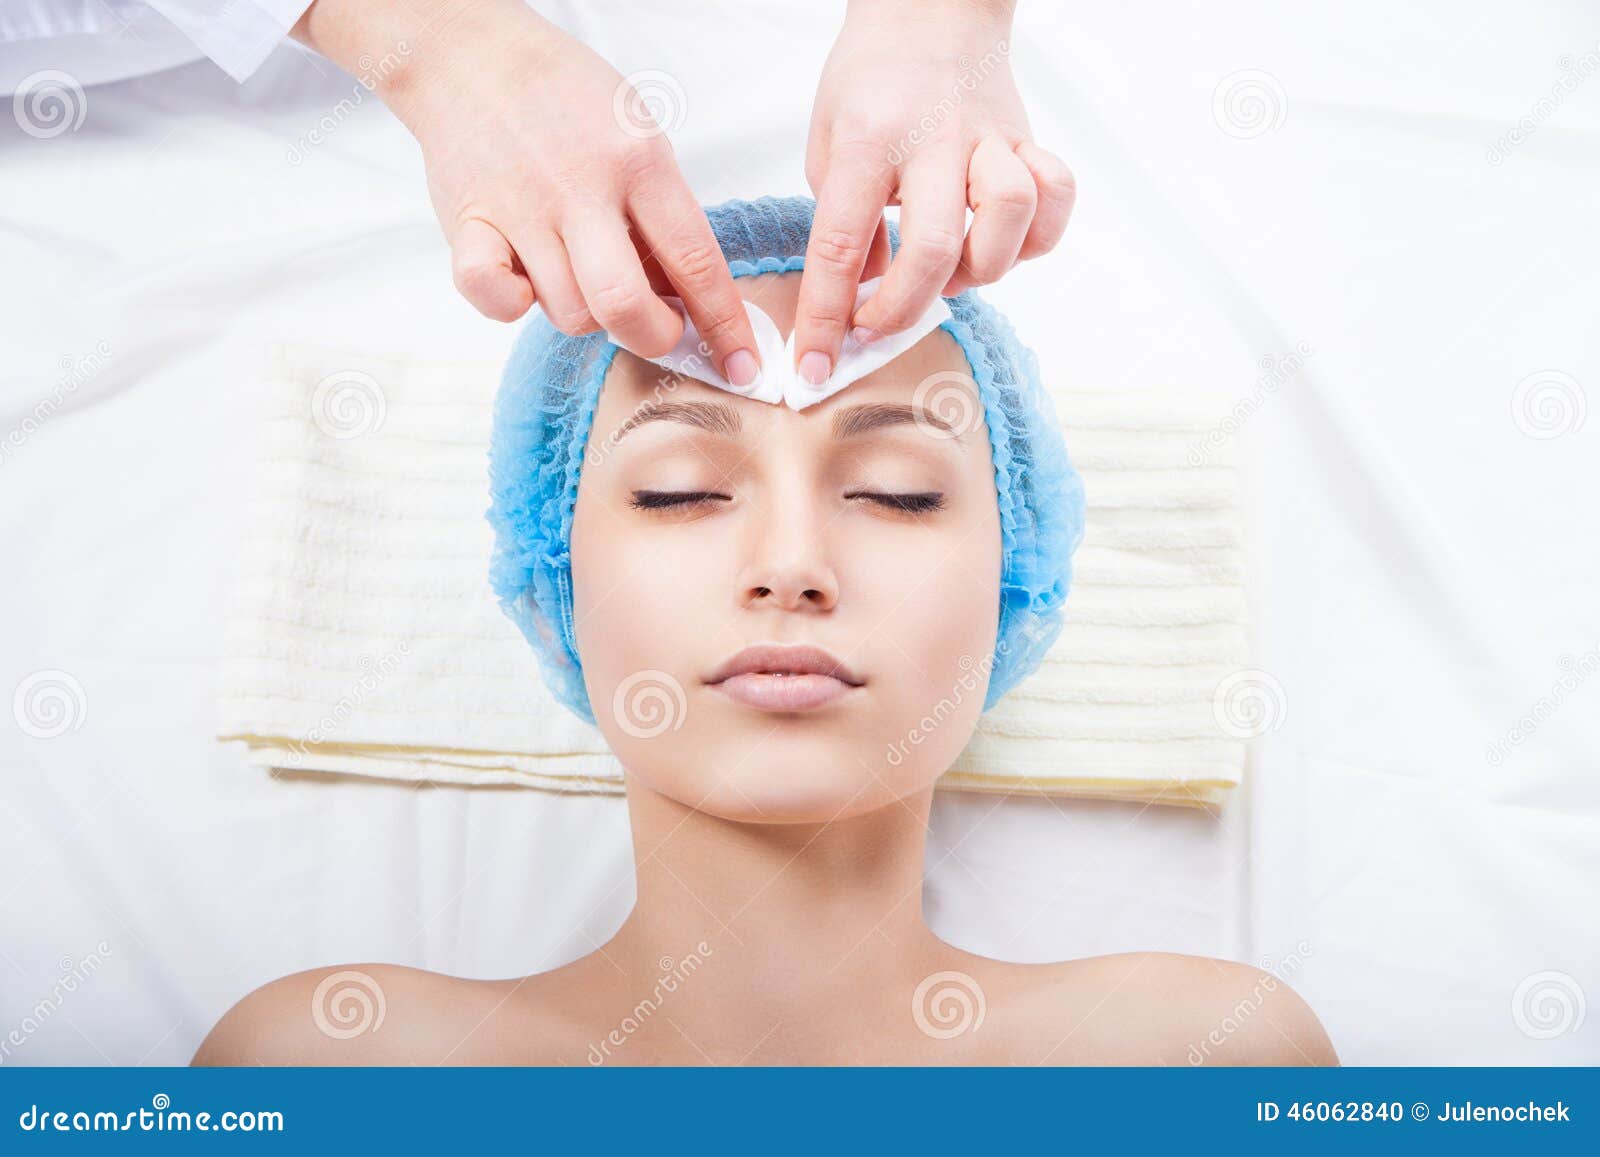 skin care - woman cleaning face by beautician